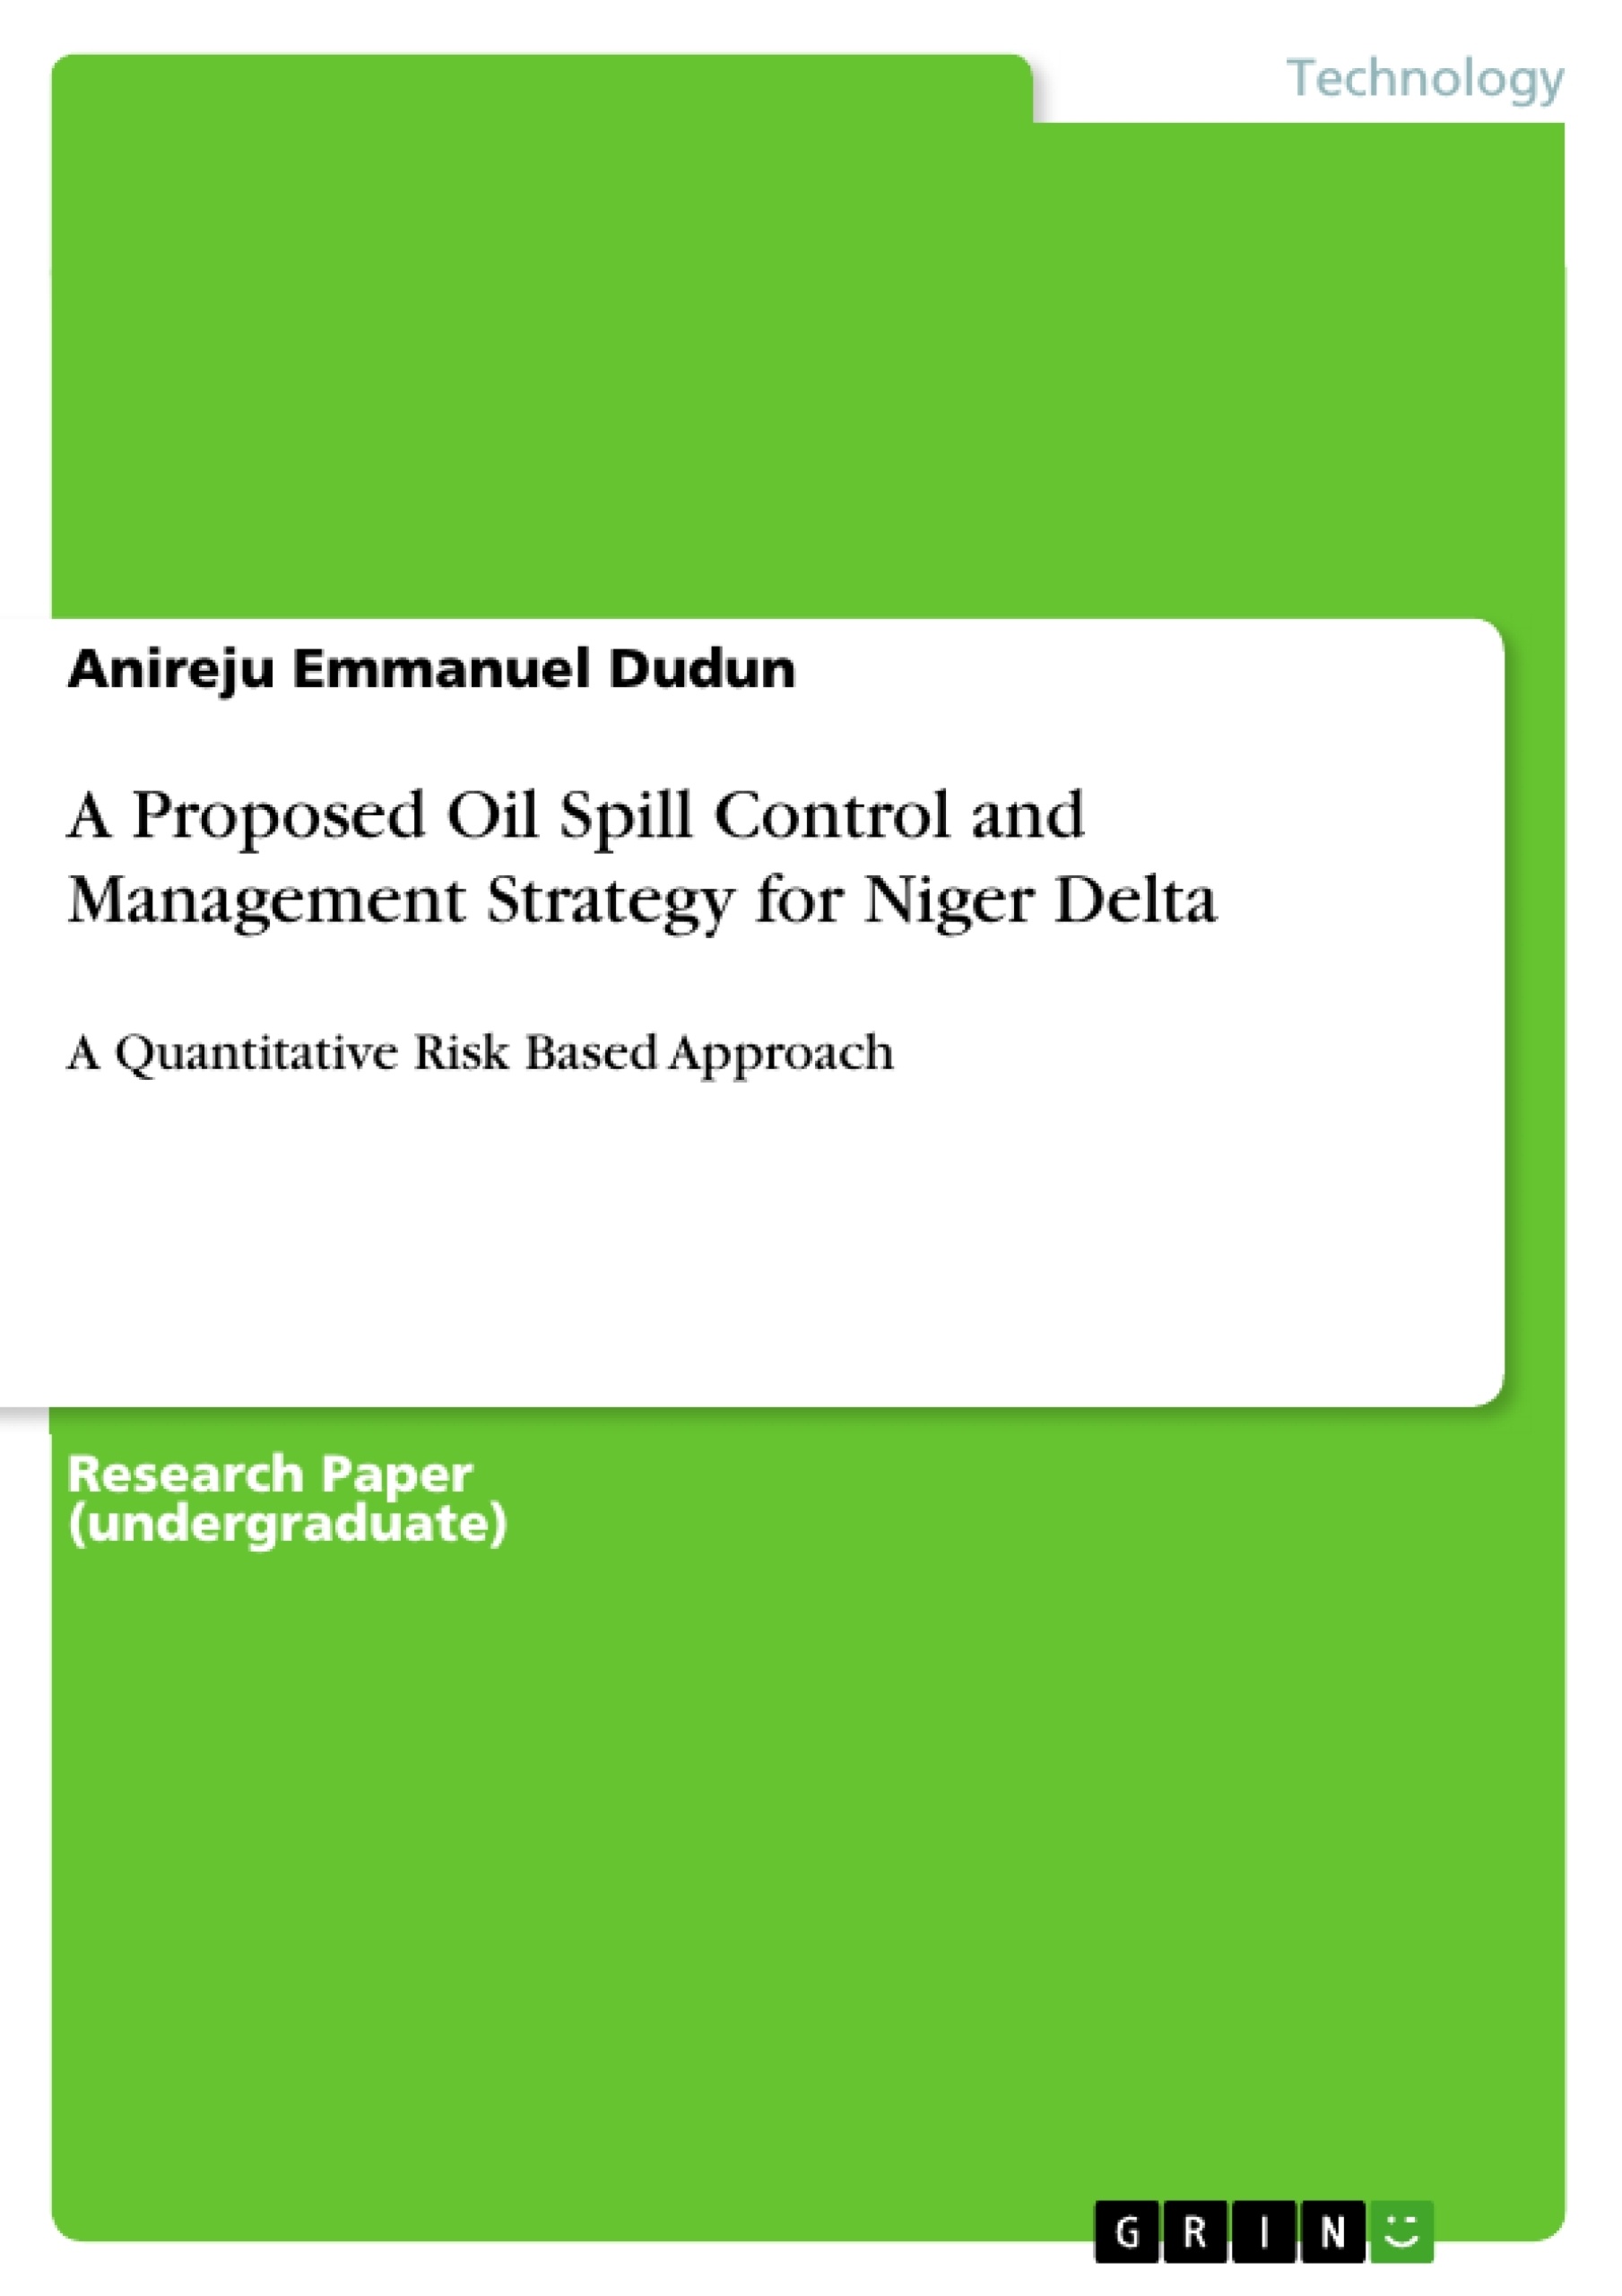 Titel: A Proposed Oil Spill Control and Management Strategy for Niger Delta